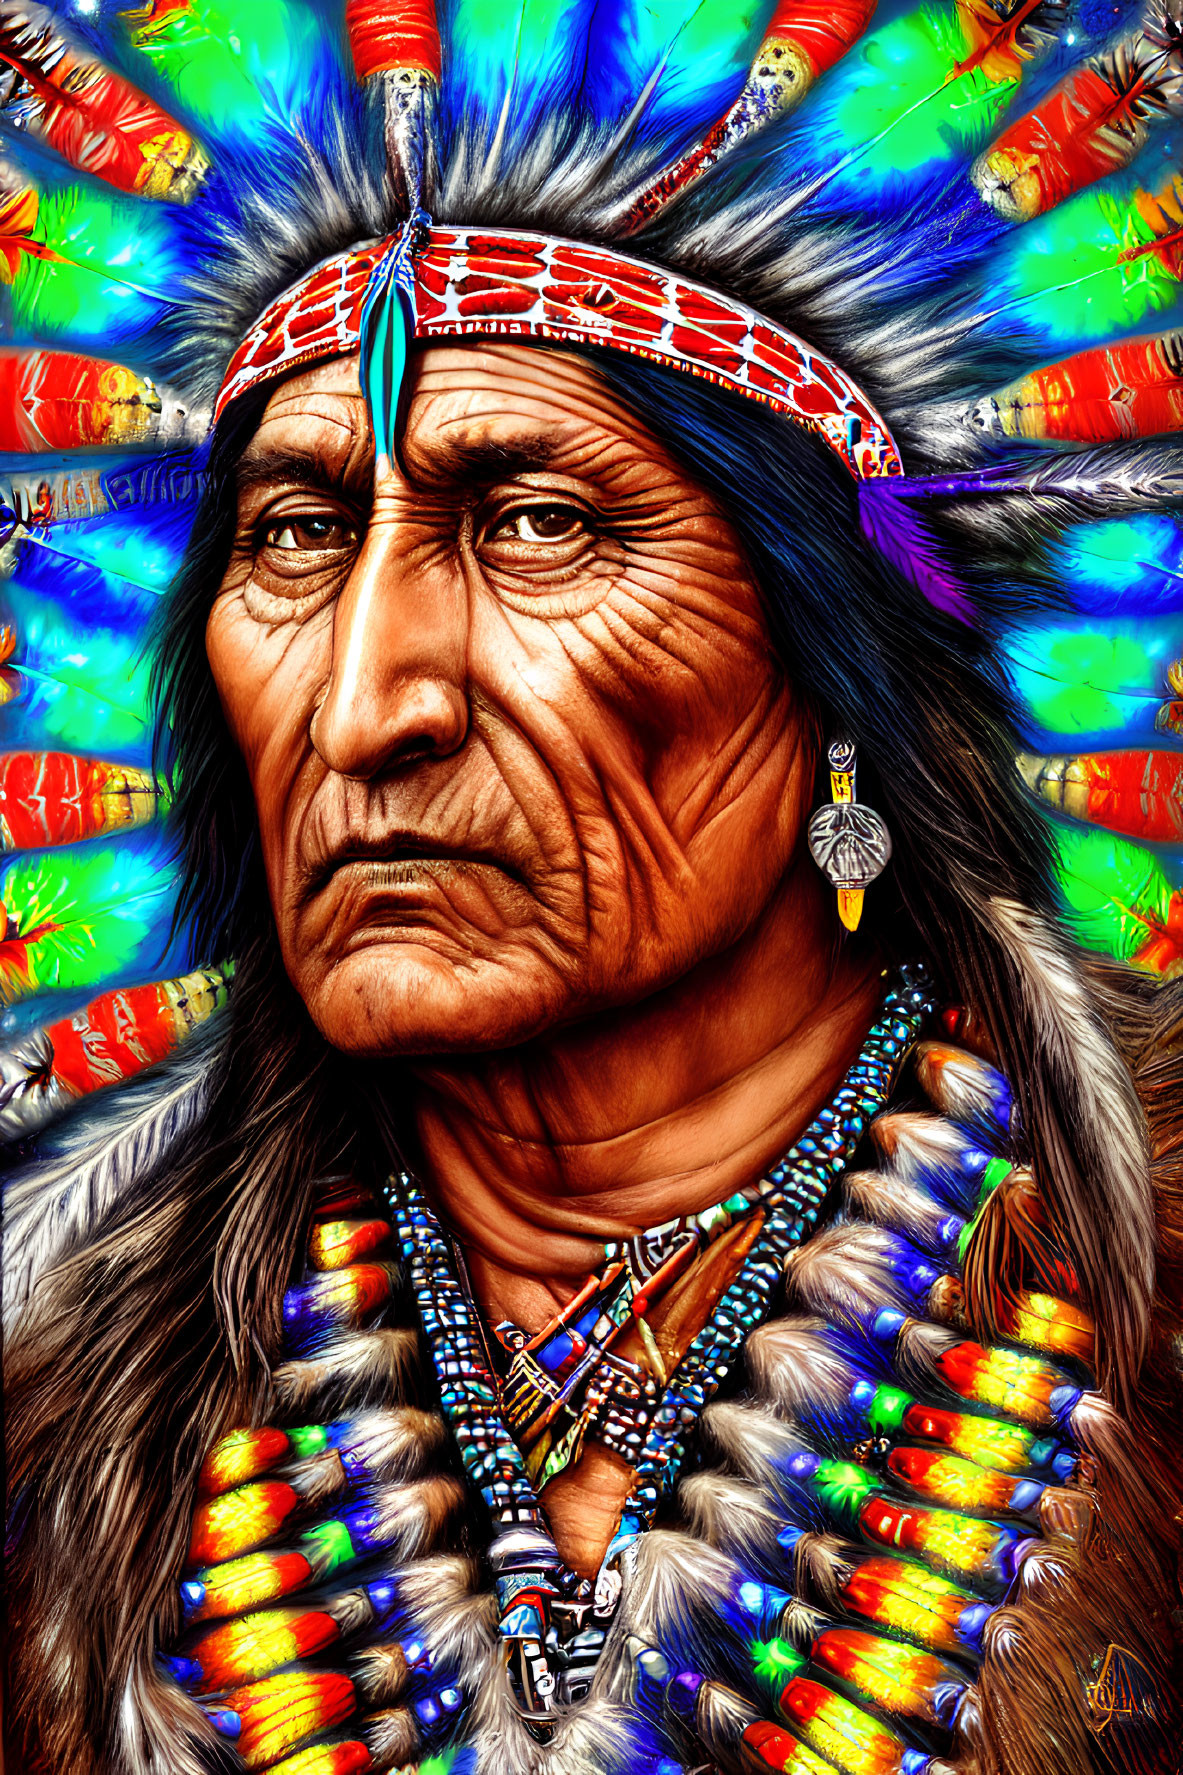 Native American chief illustration with feather headdress and traditional regalia